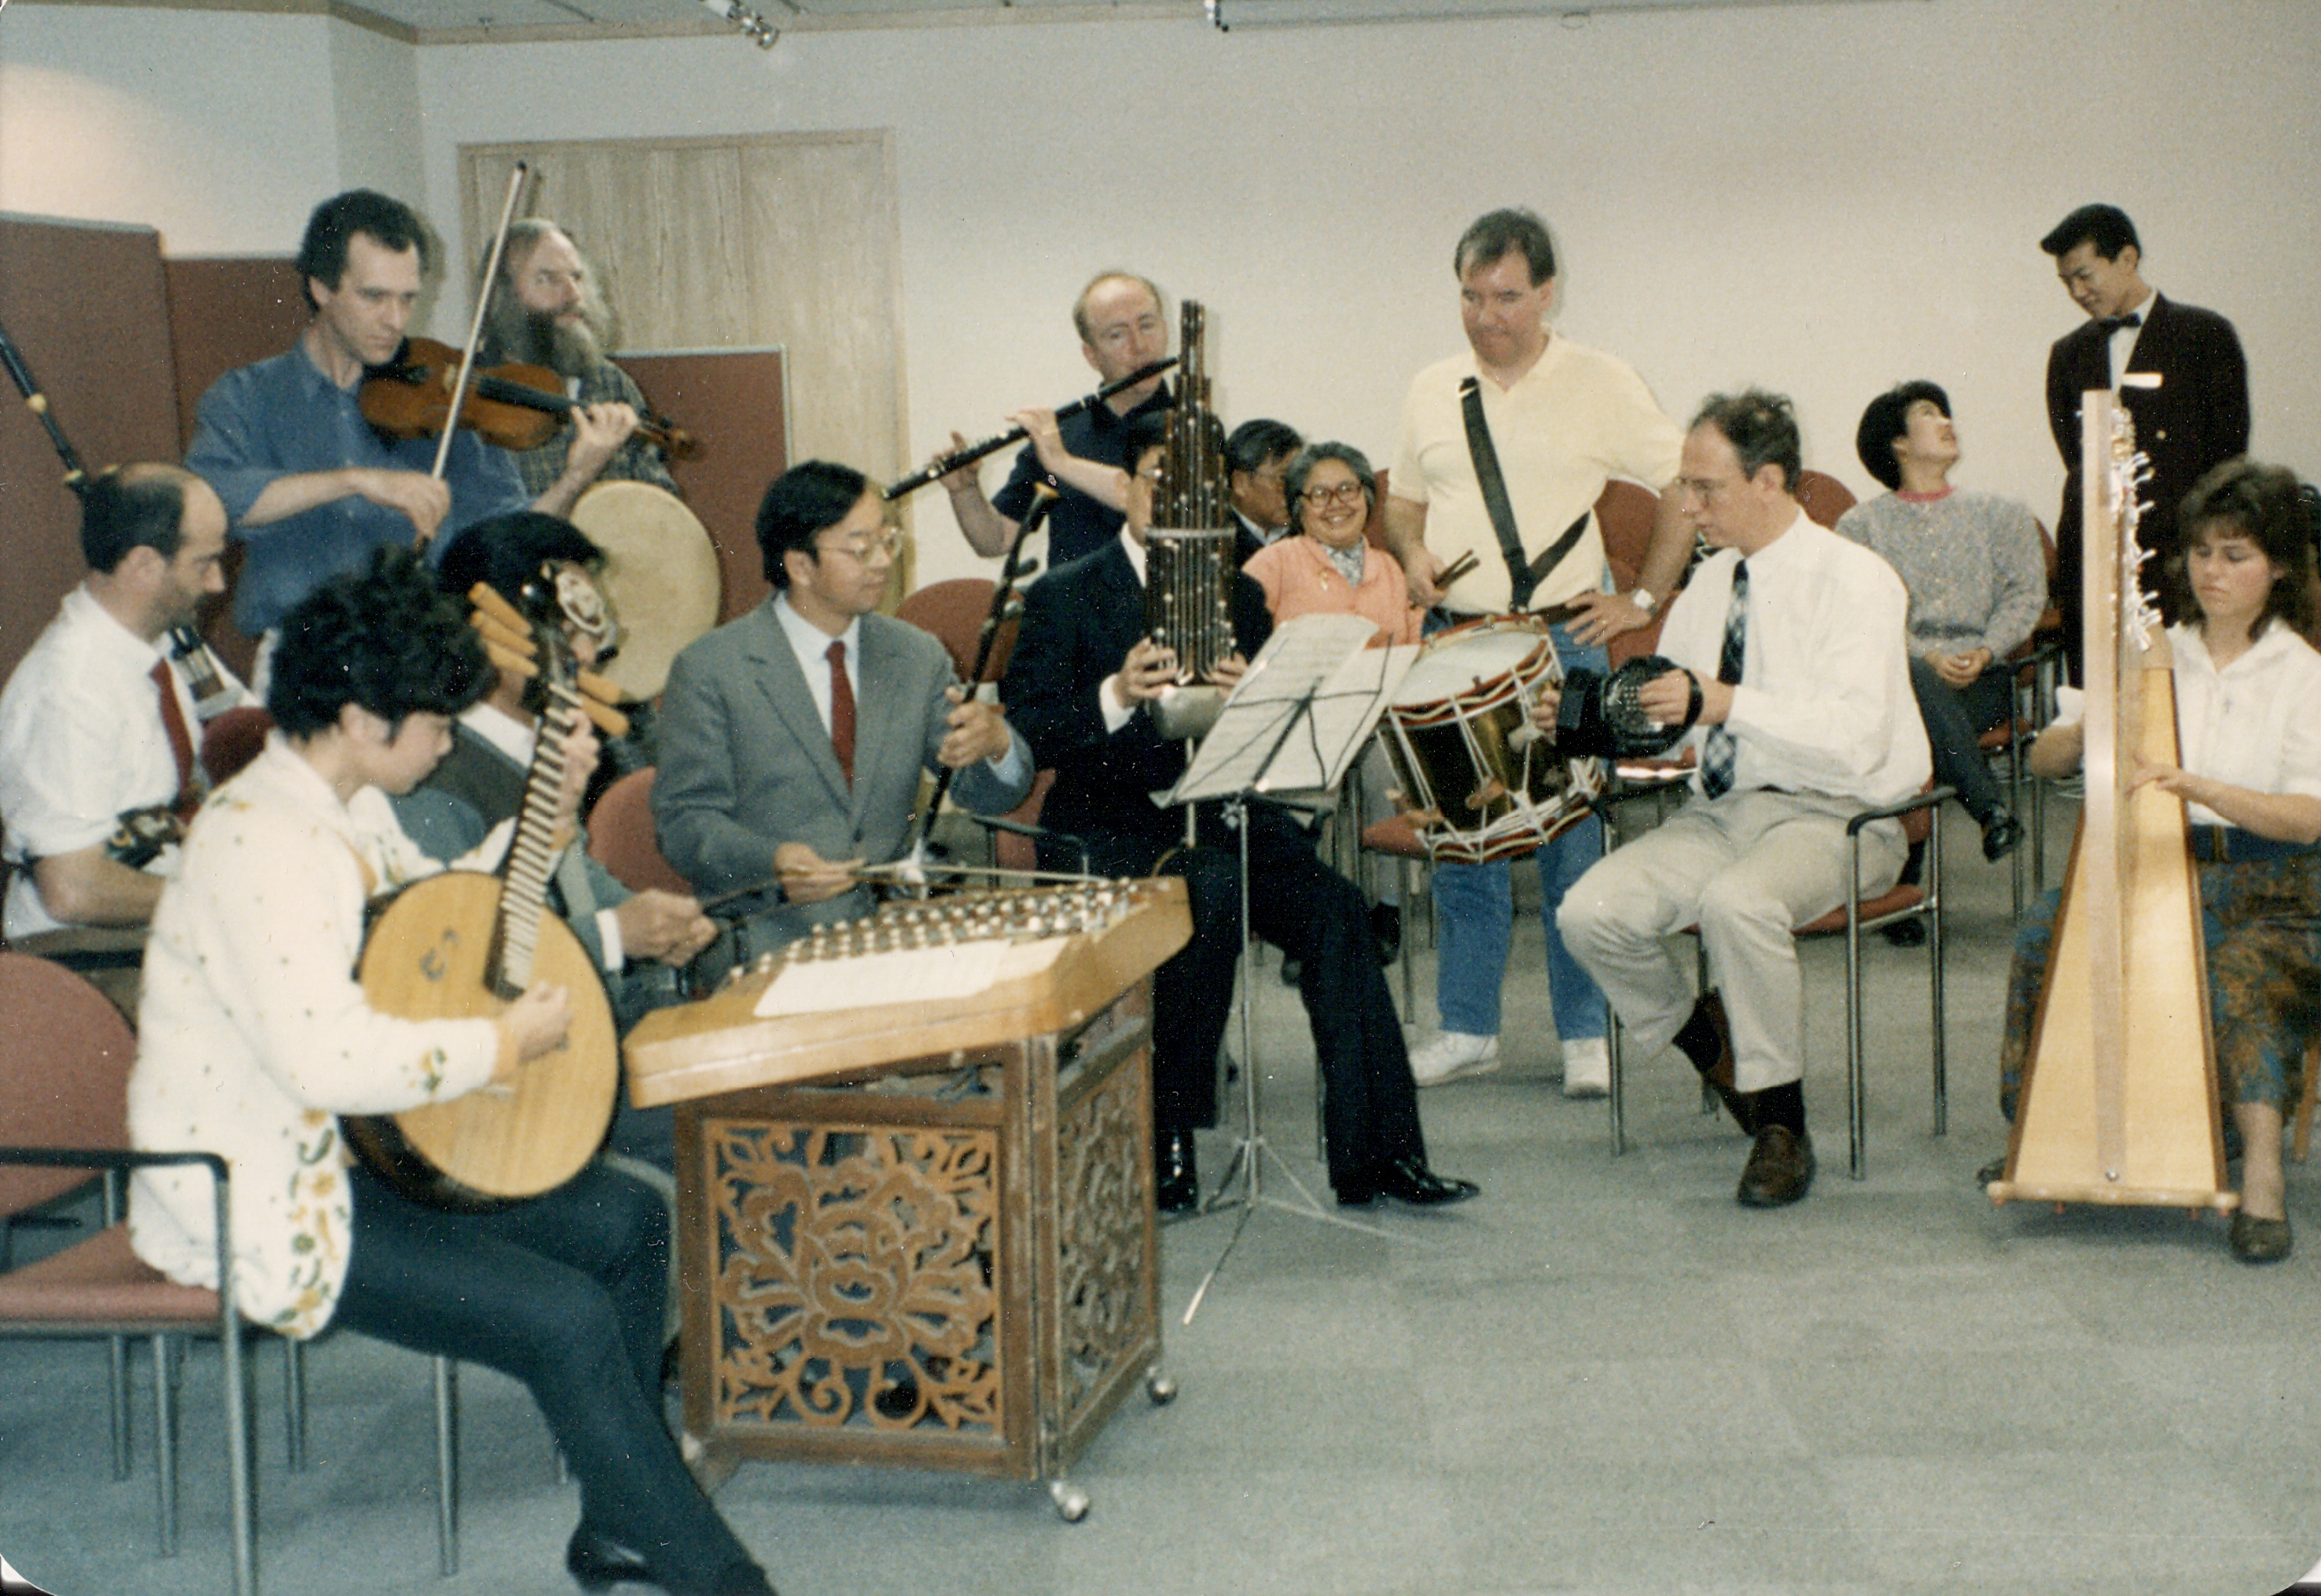 Chinese musicians & The Whistlebinkies play in Beijing in November 1990 during our tour